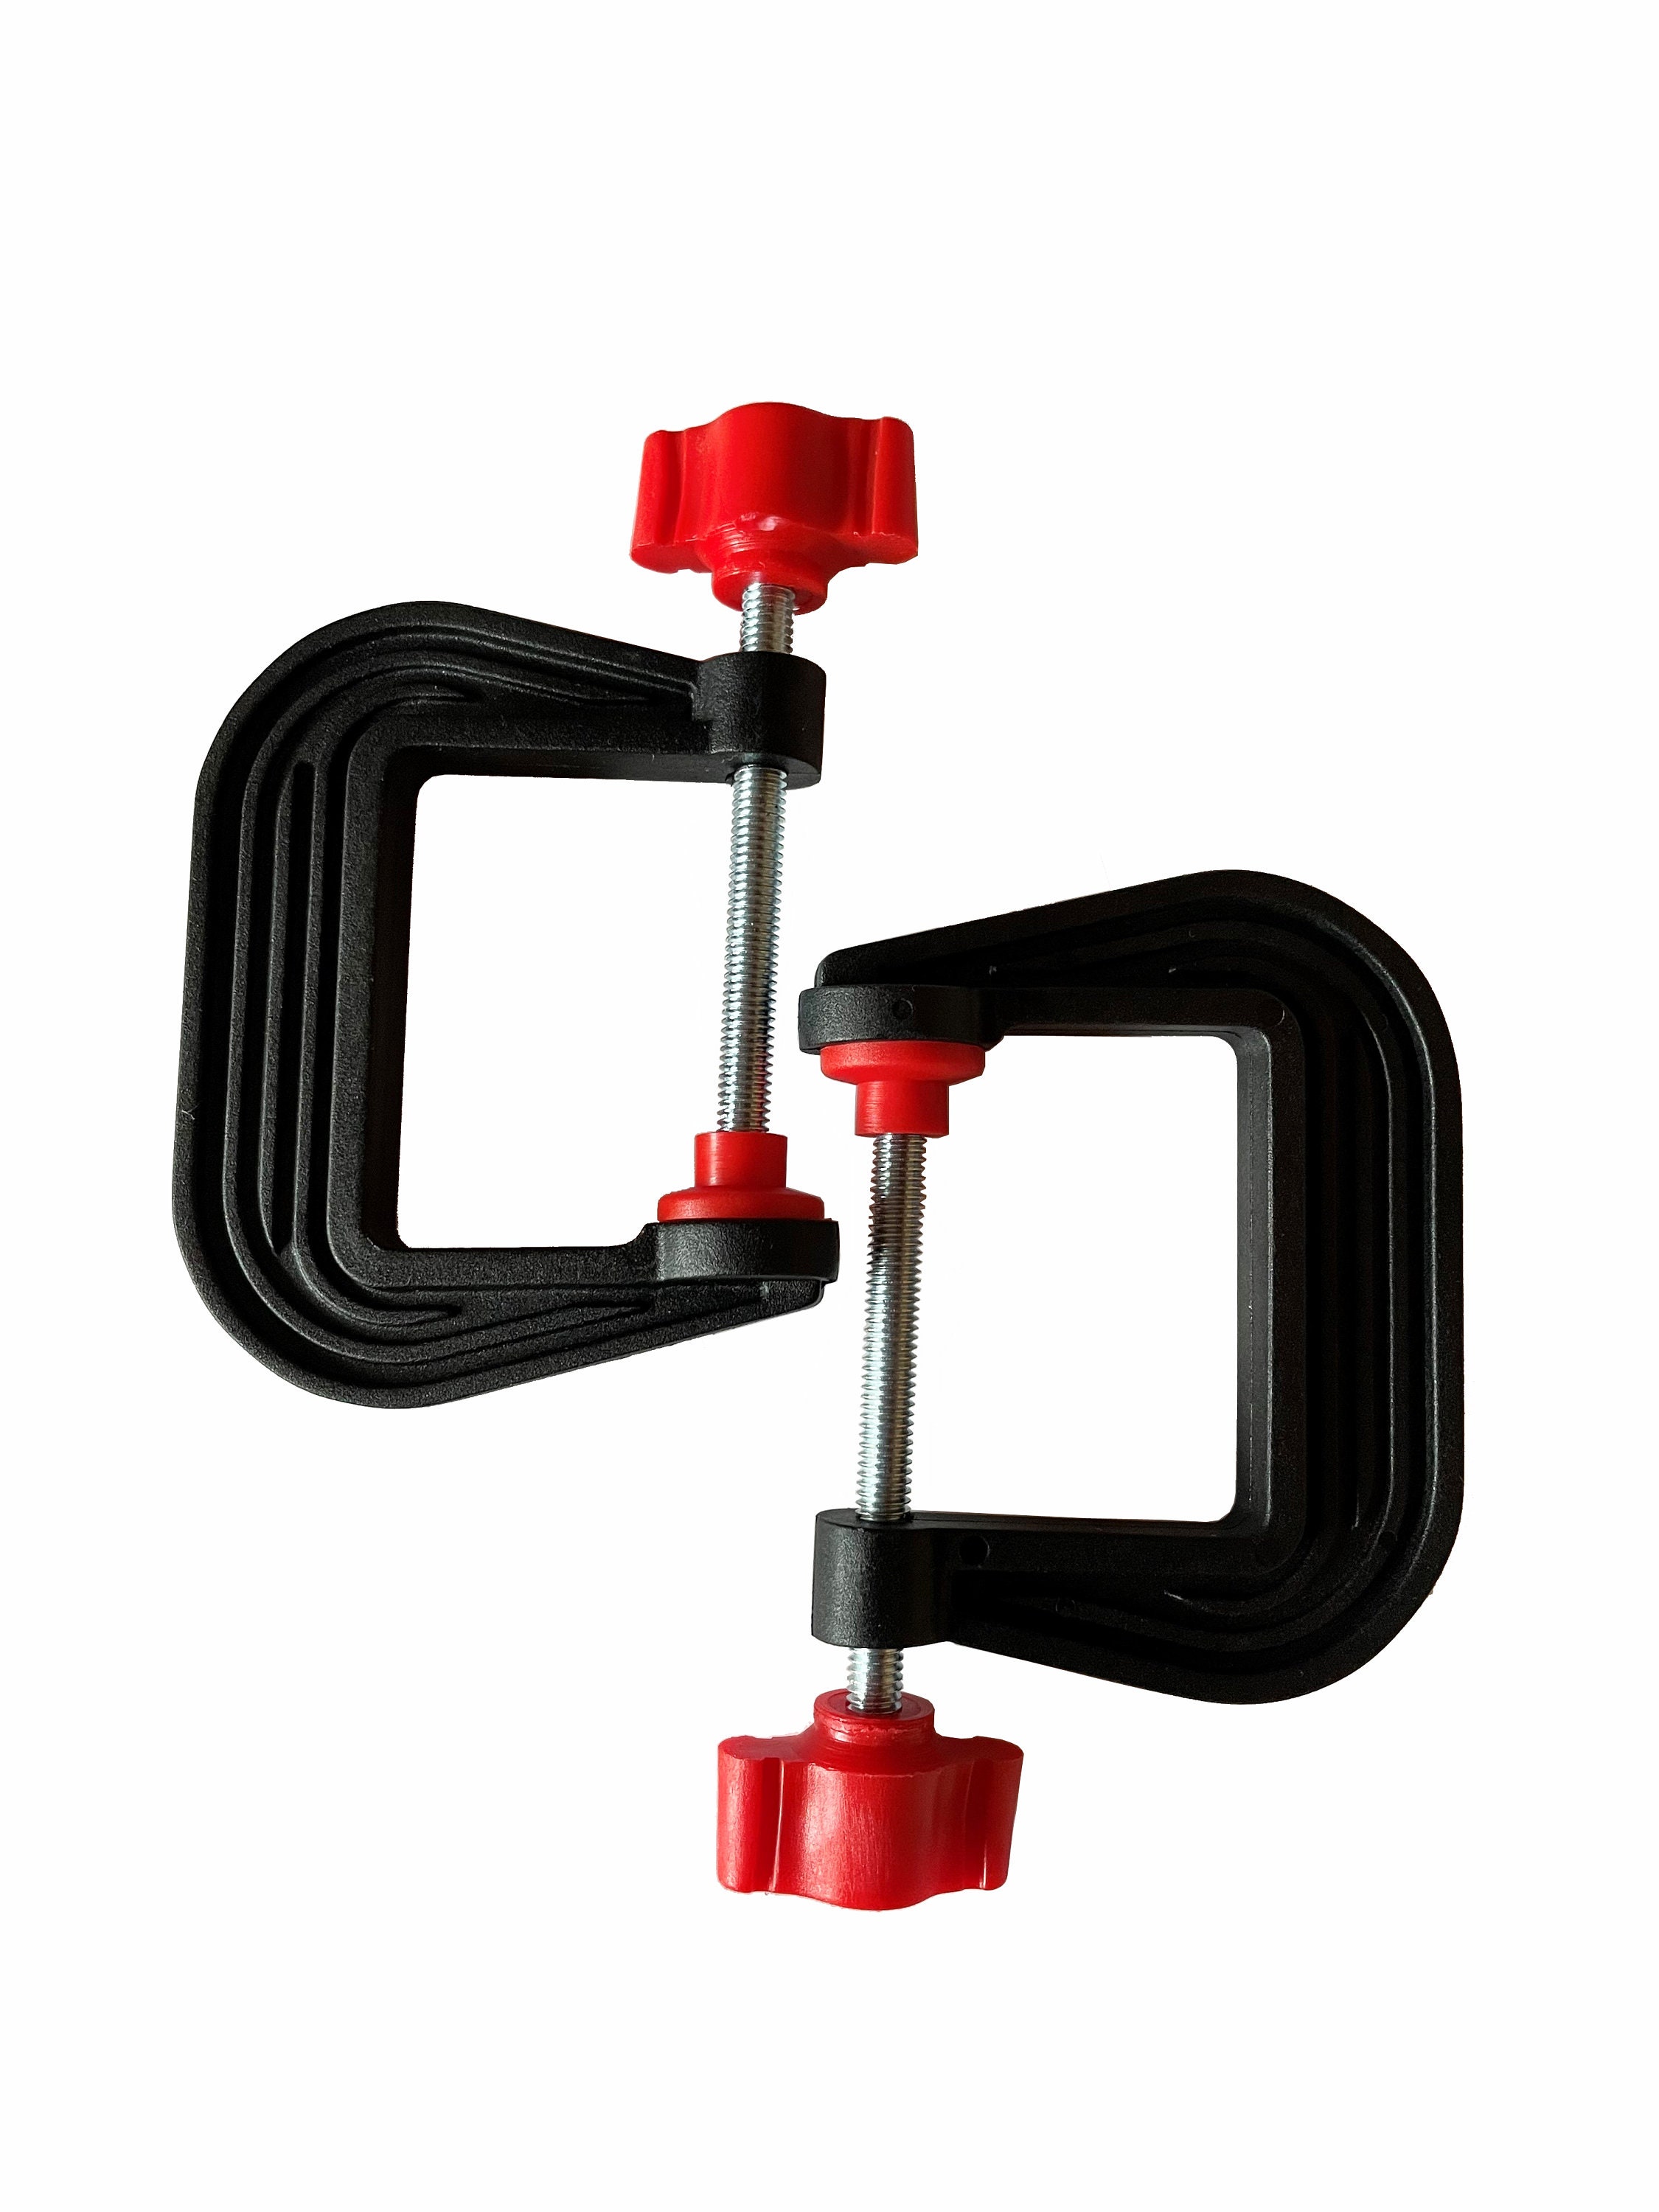 6 Piece Nylon Clamp Set 65mm 2.5 Inch With Spring Swiveling Jaws